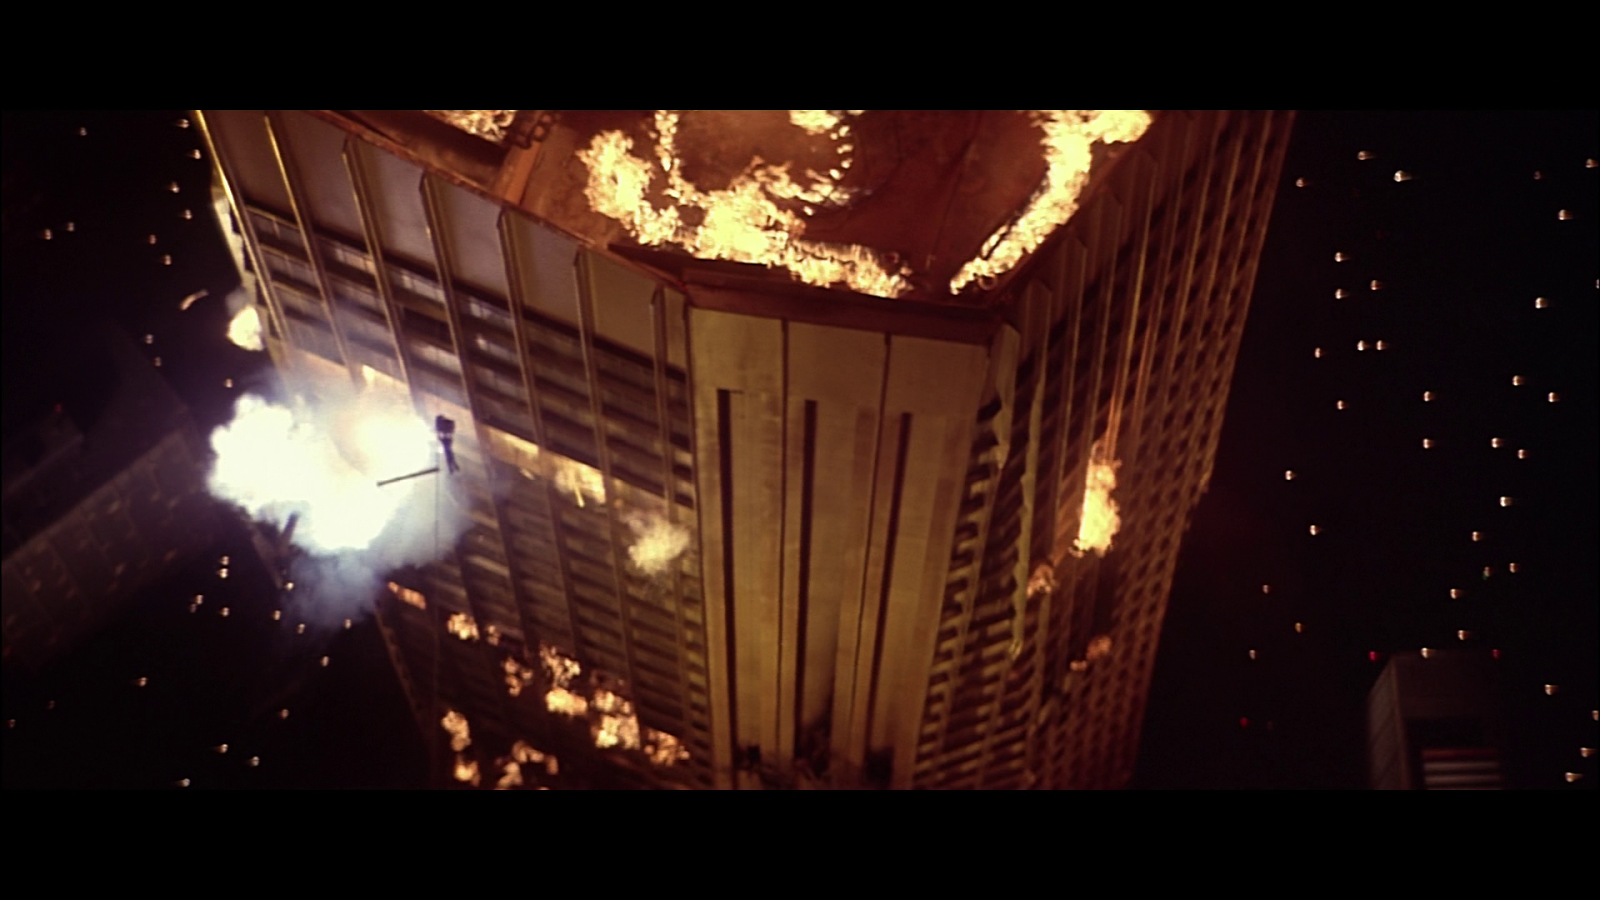 The Towering Inferno #4